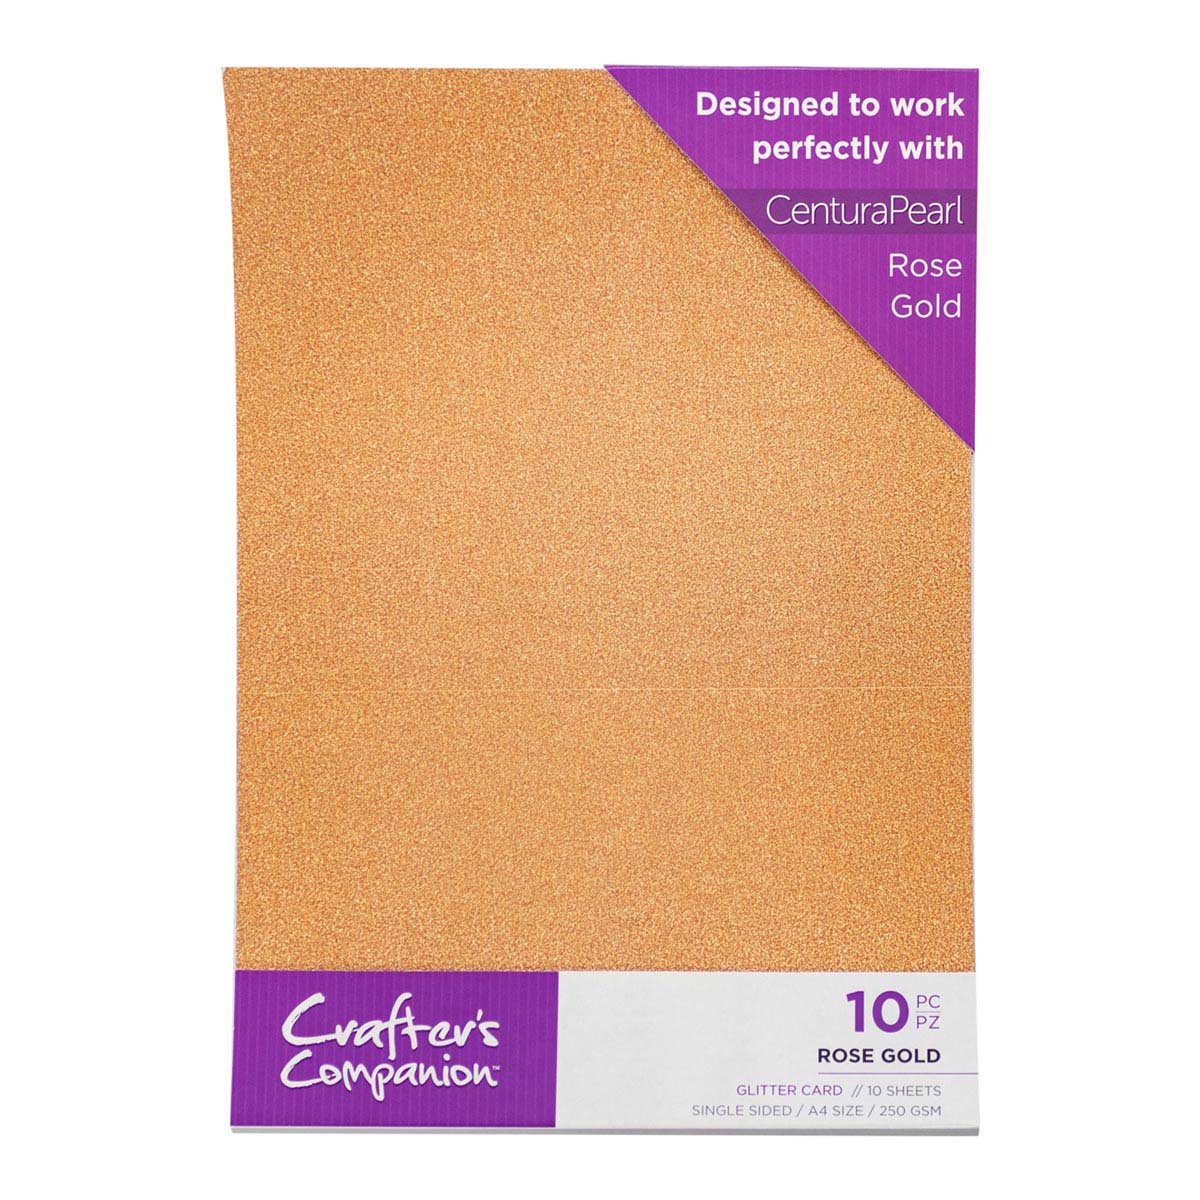 Crafter's Companion - A4 Glitter Card - 250gsm 10 Sheets - Rose Gold